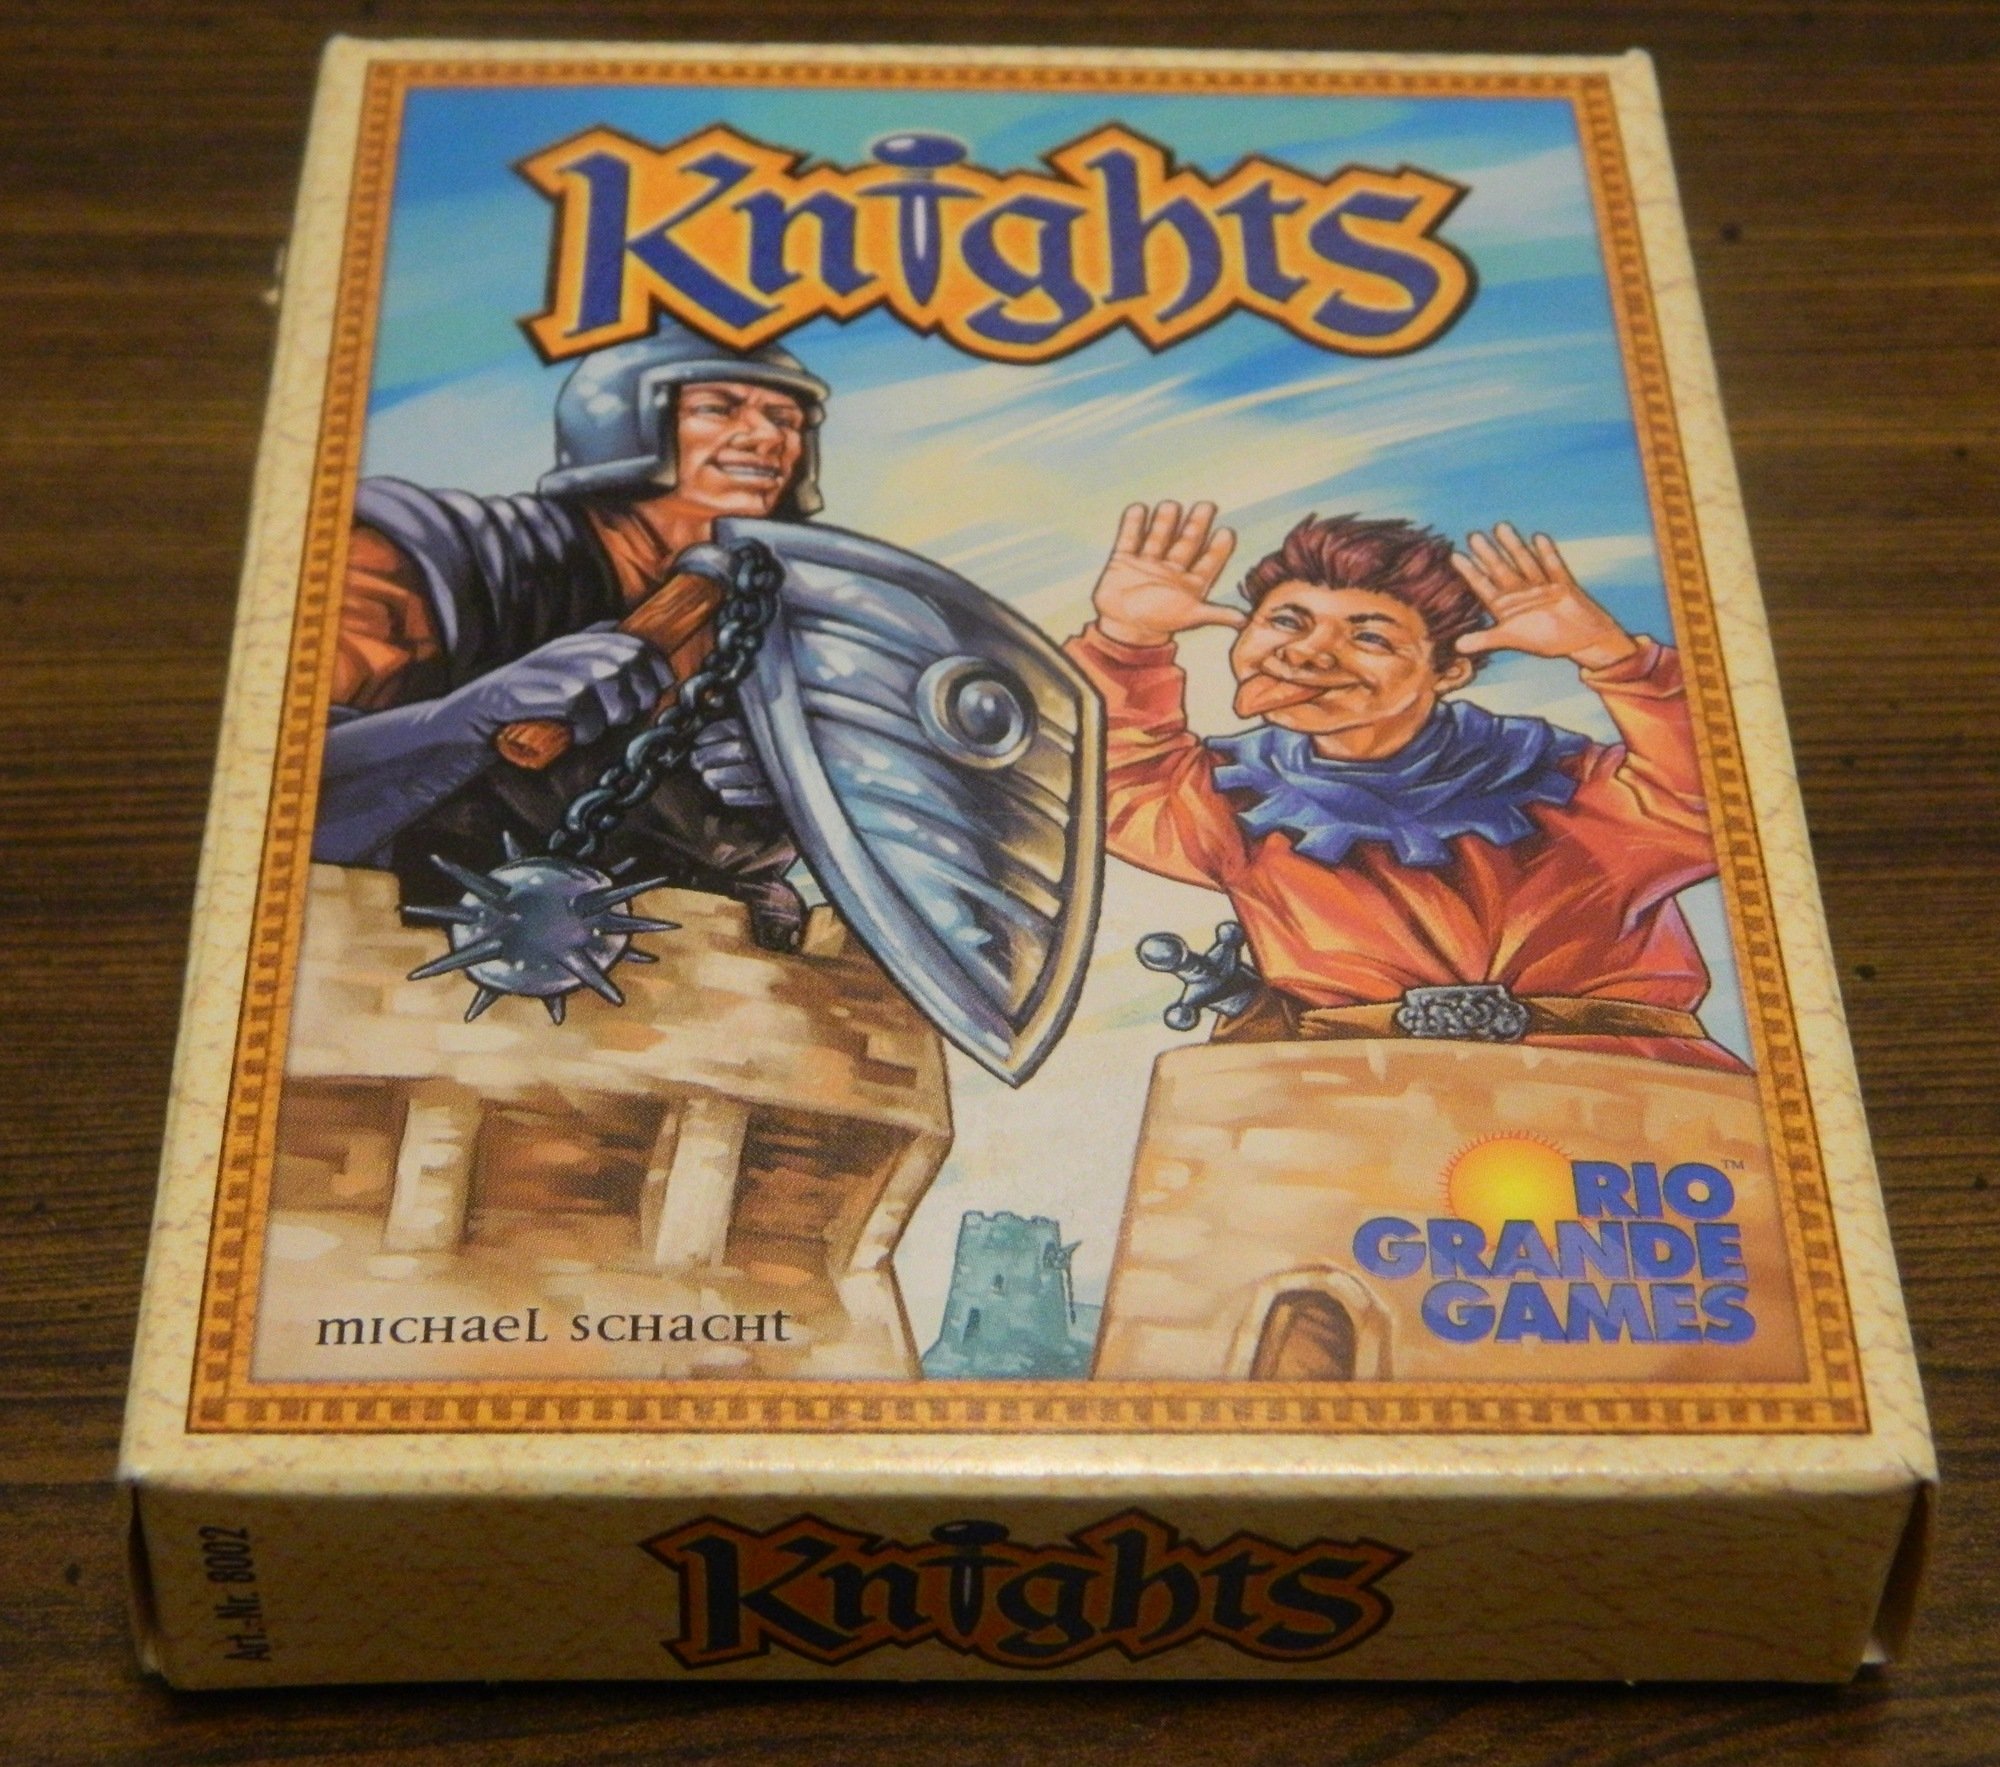 Knights (AKA Knatsch) Dice Game Review and Rules